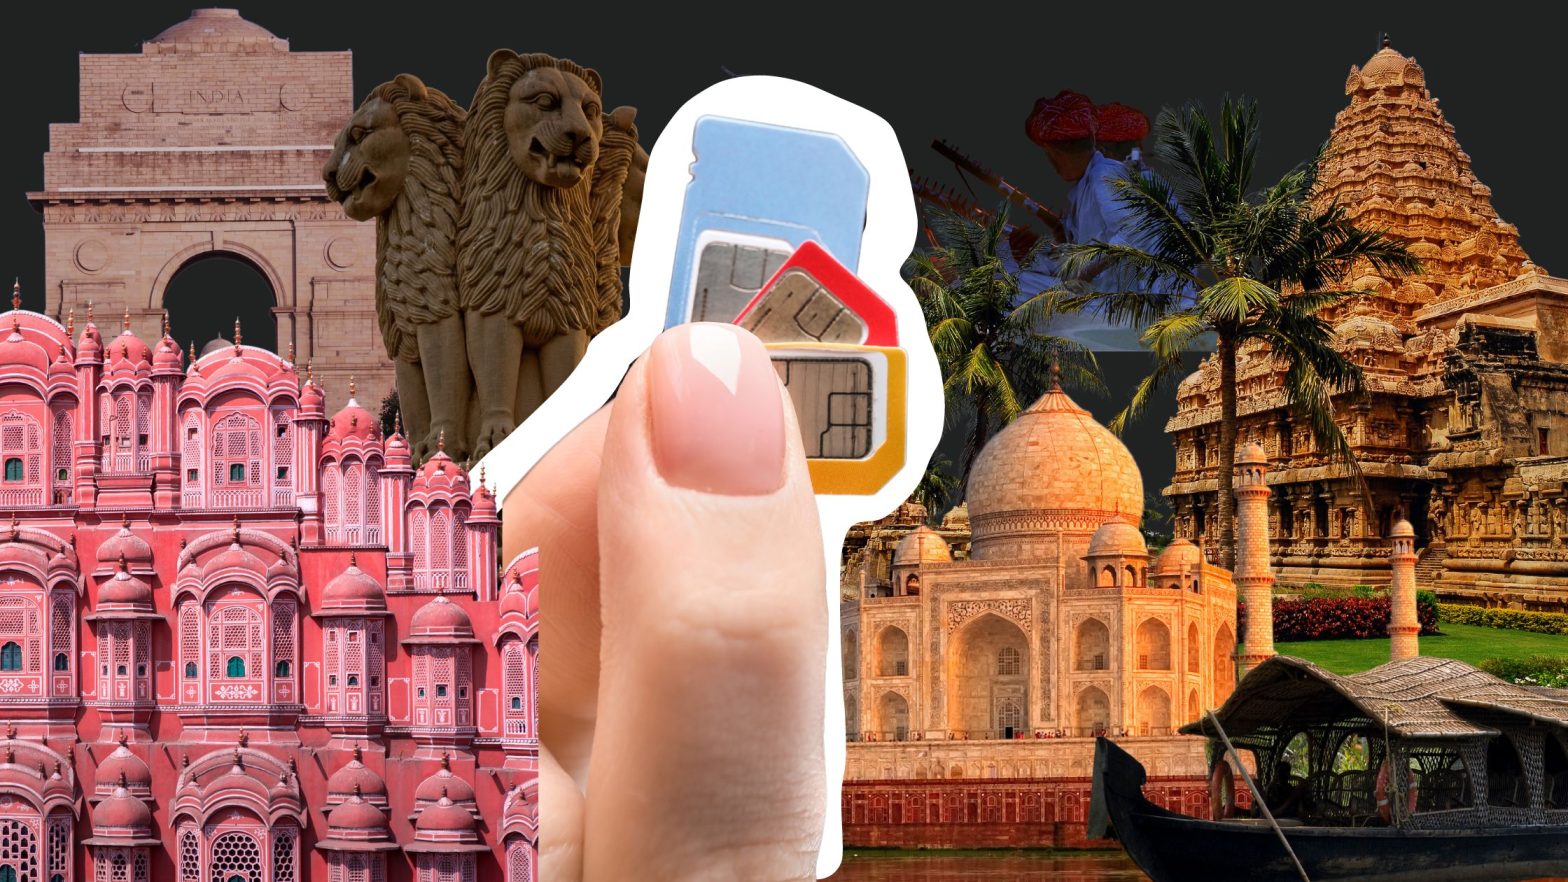 The image shows a sim card in India and various indian monuments